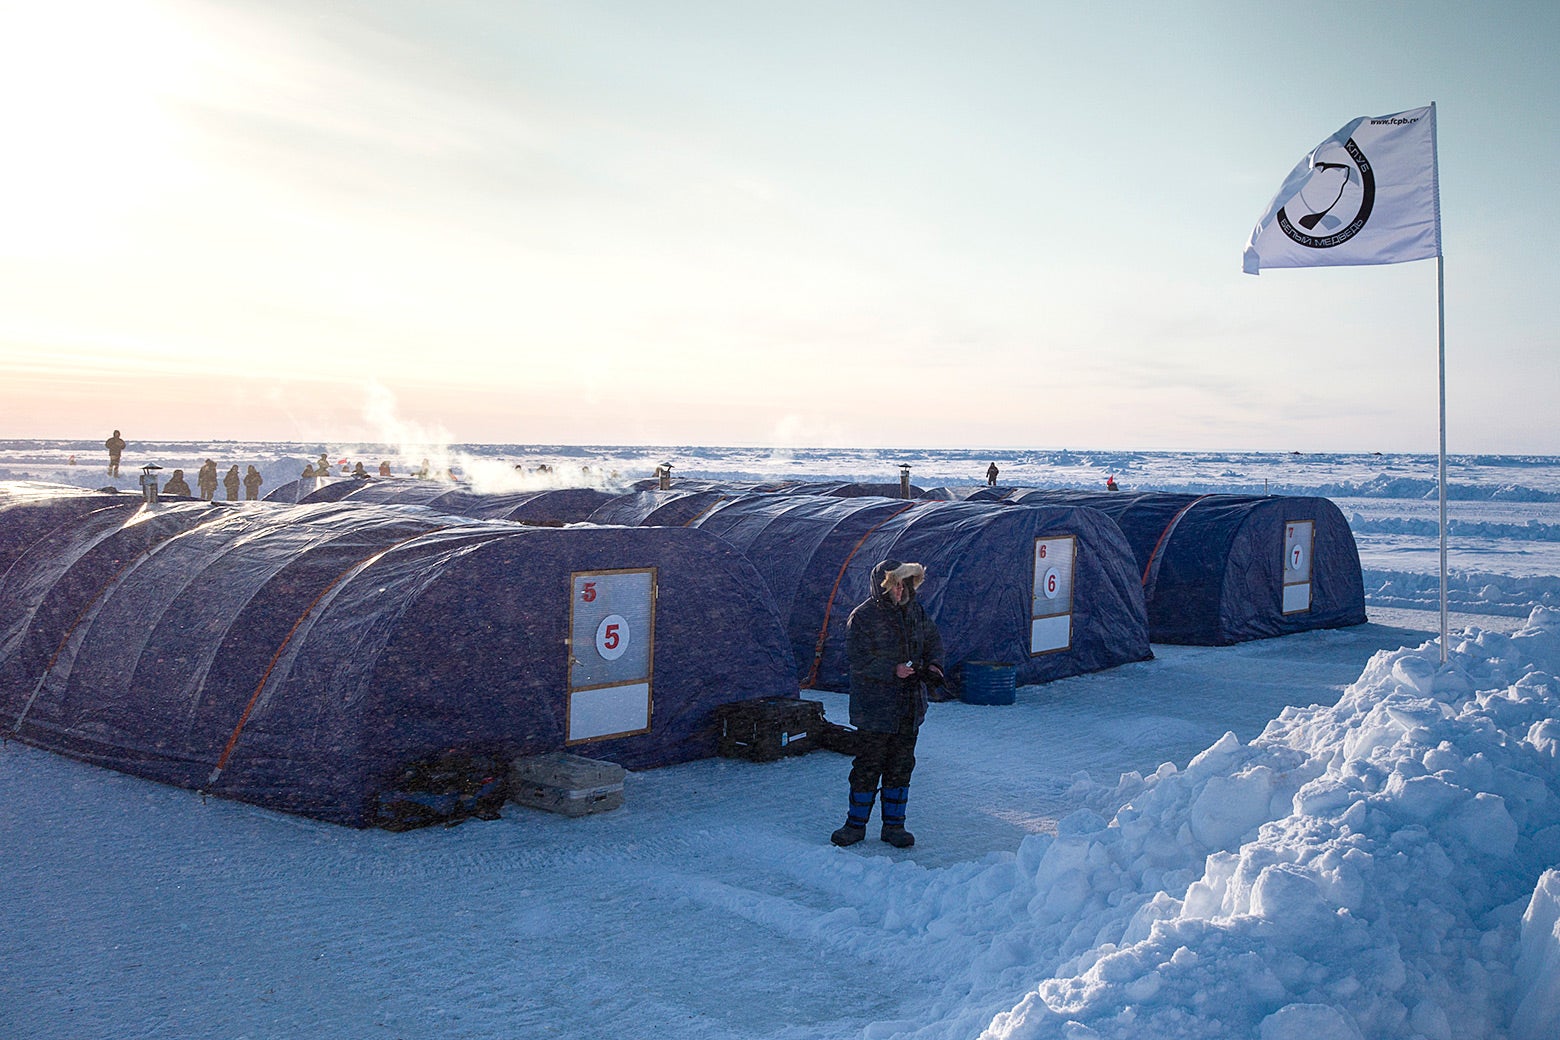 A Barneo expedition ice camp in 2016.